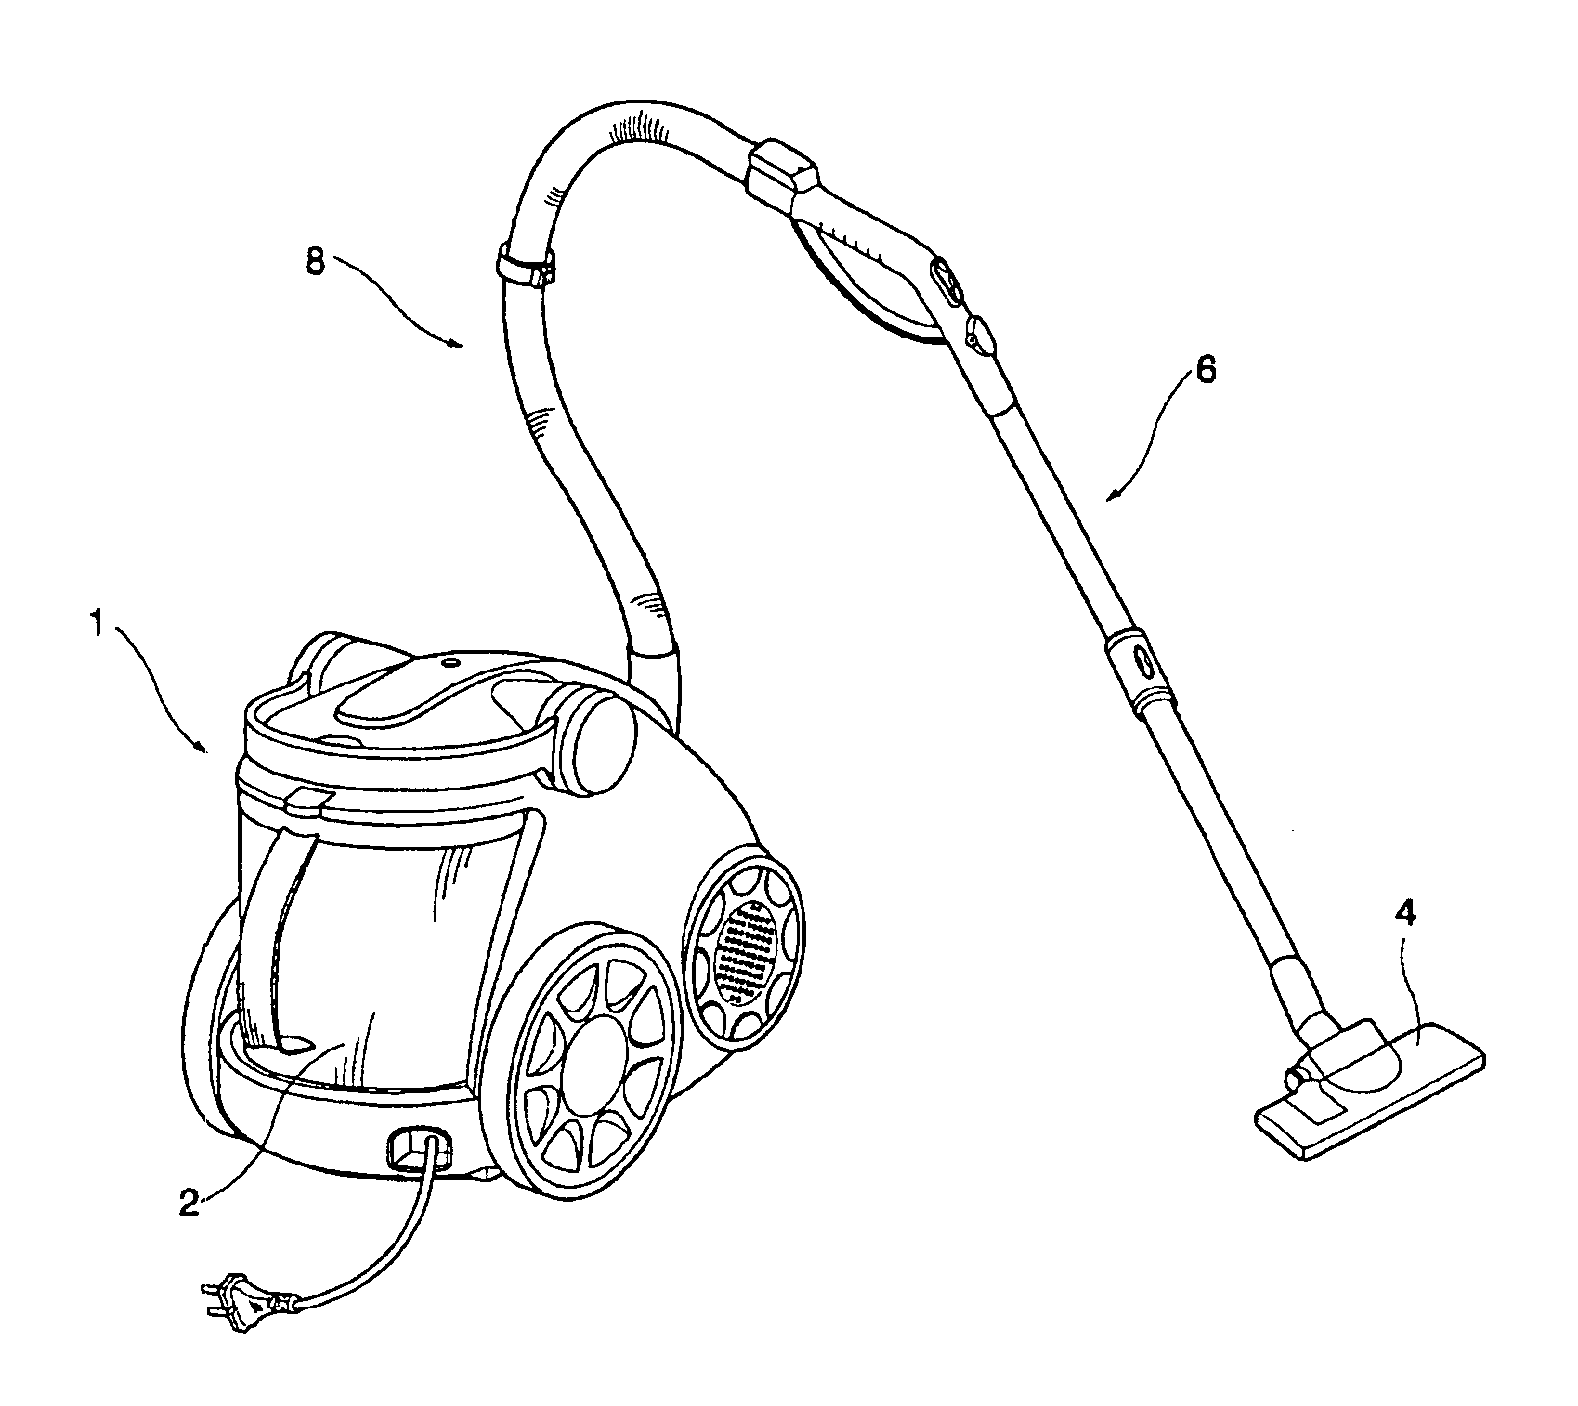 Dust collection unit for use in vacuum cleaner and main body of vacuum cleaner having the same